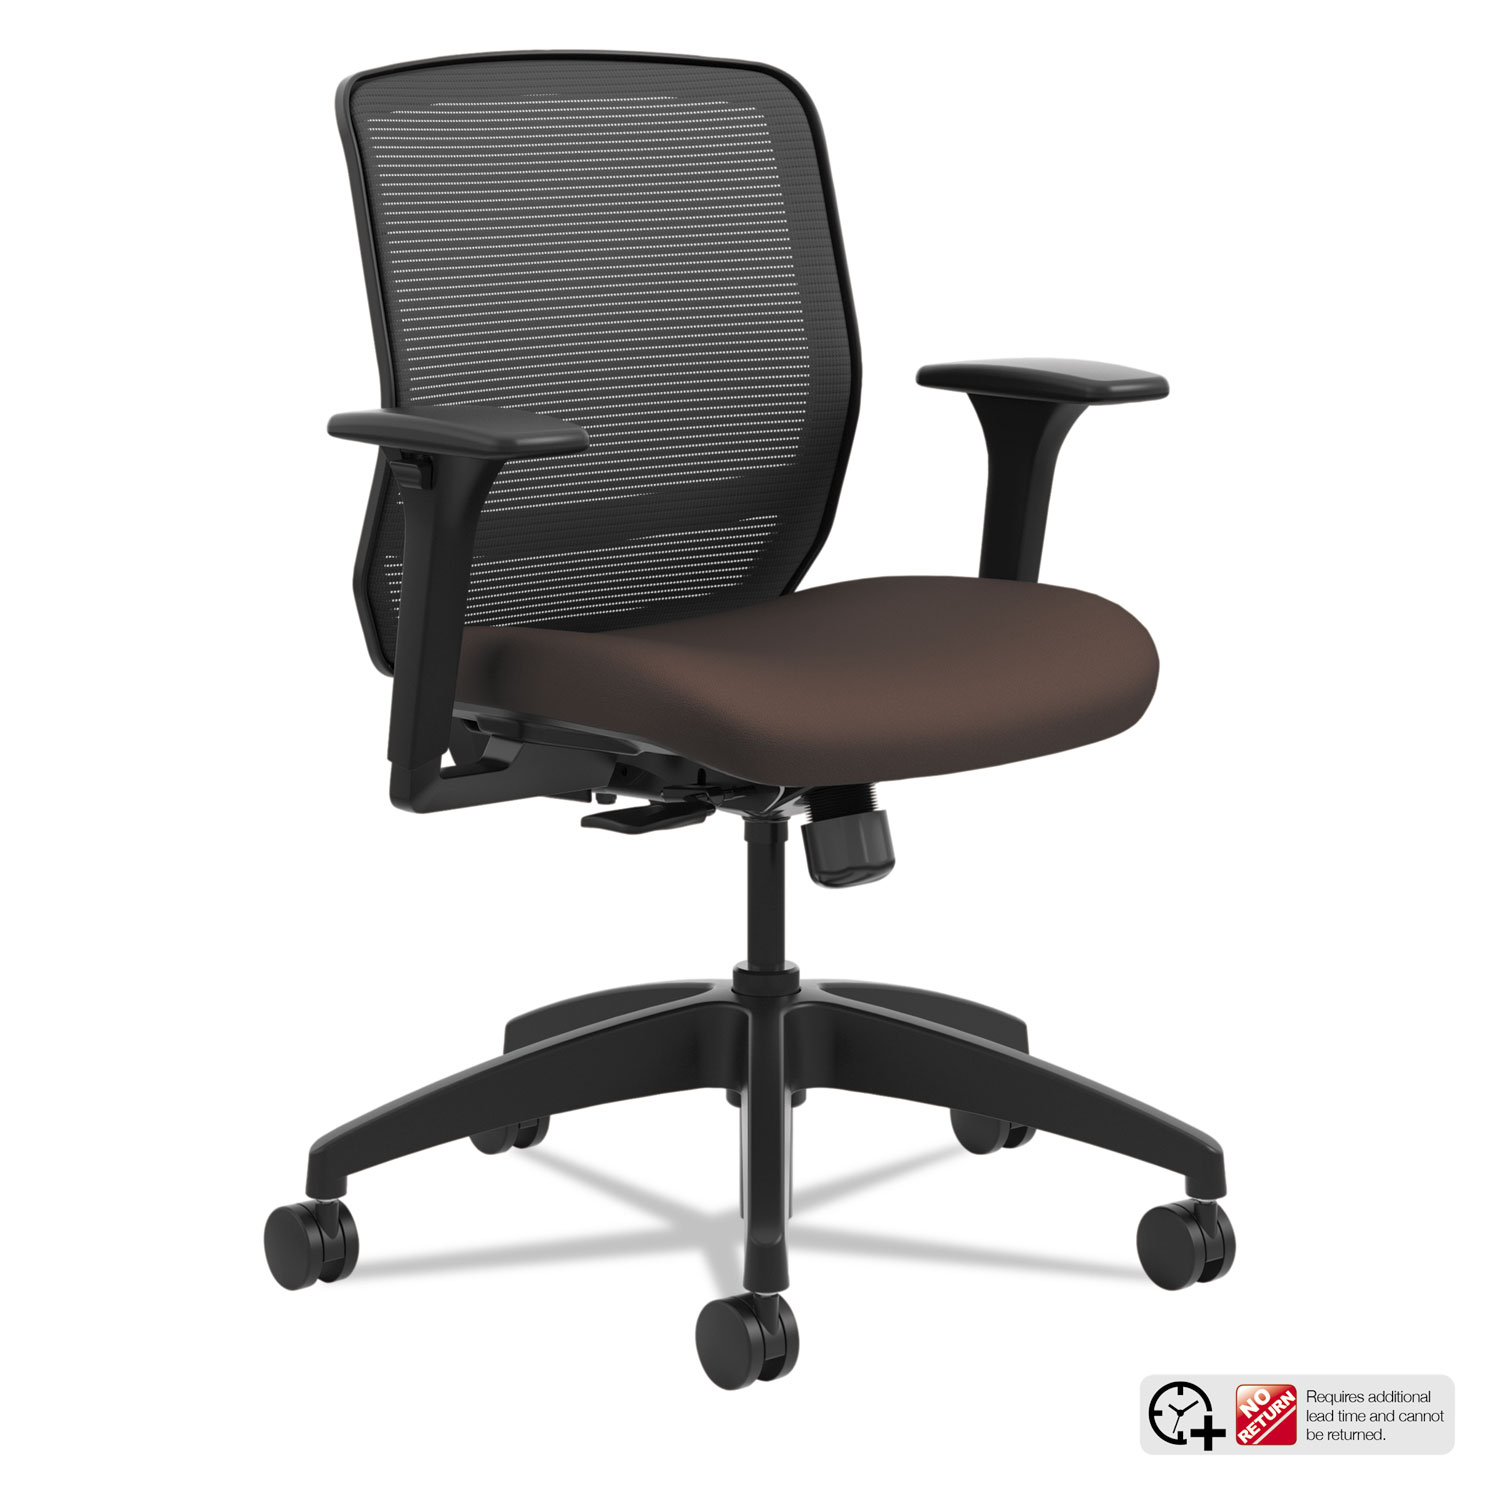  HON HQTMM.Y0.A.H.IM.CU49.SB Quotient Series Mesh Mid-Back Task Chair, Supports up to 300 lbs., Espresso Seat/Black Back, Black Base (HONQTMMY1ACU49) 